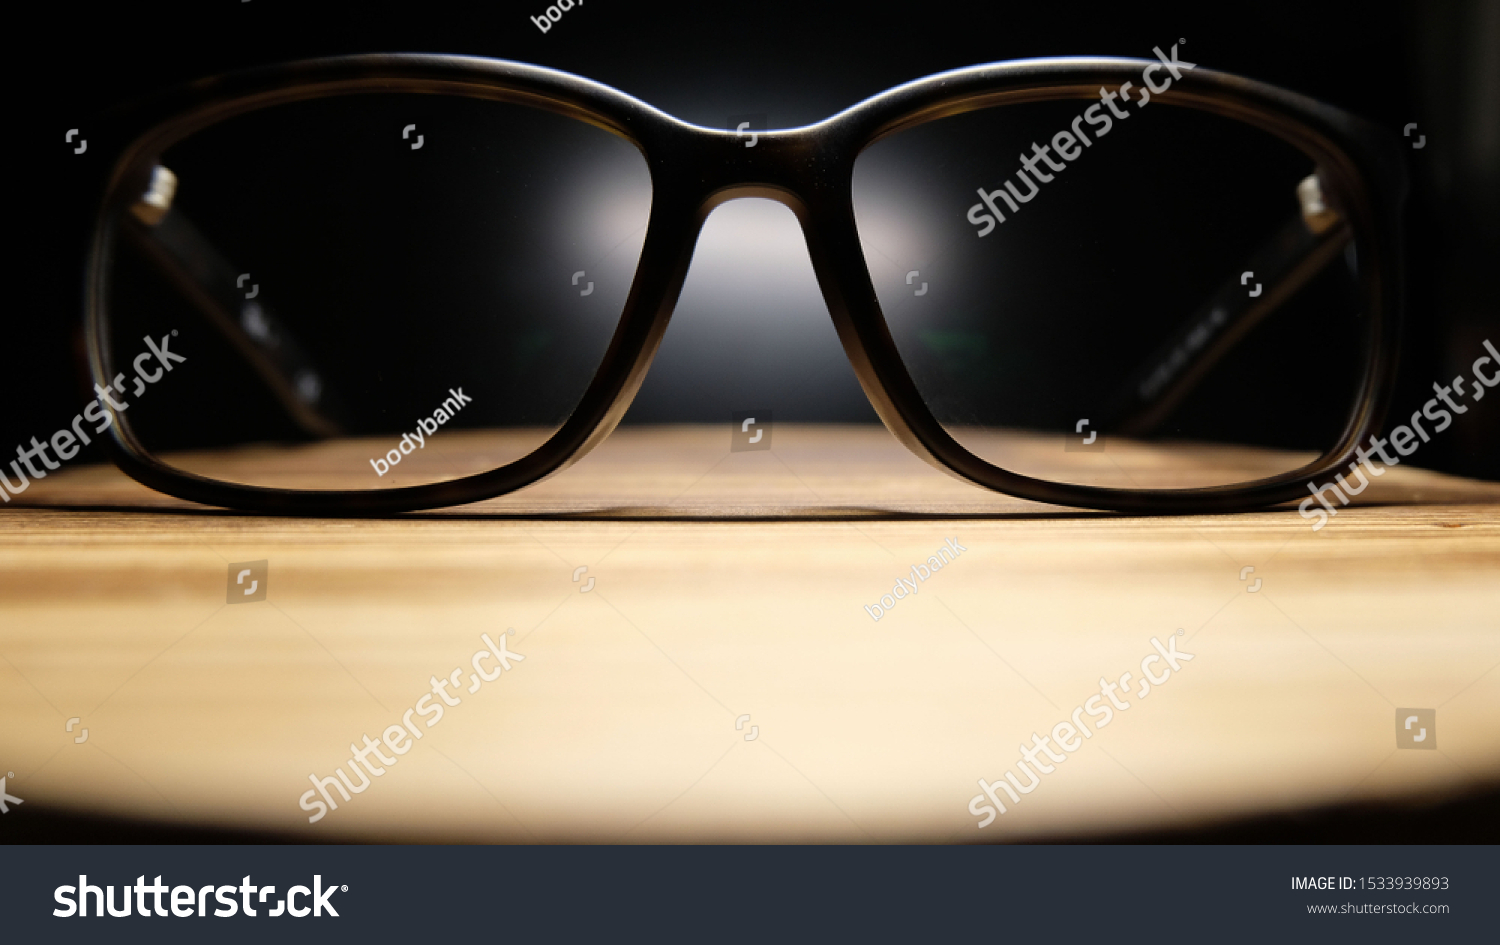 The glasses have black legs that shine through the eyepiece points on the wooden table. On a black background #1533939893